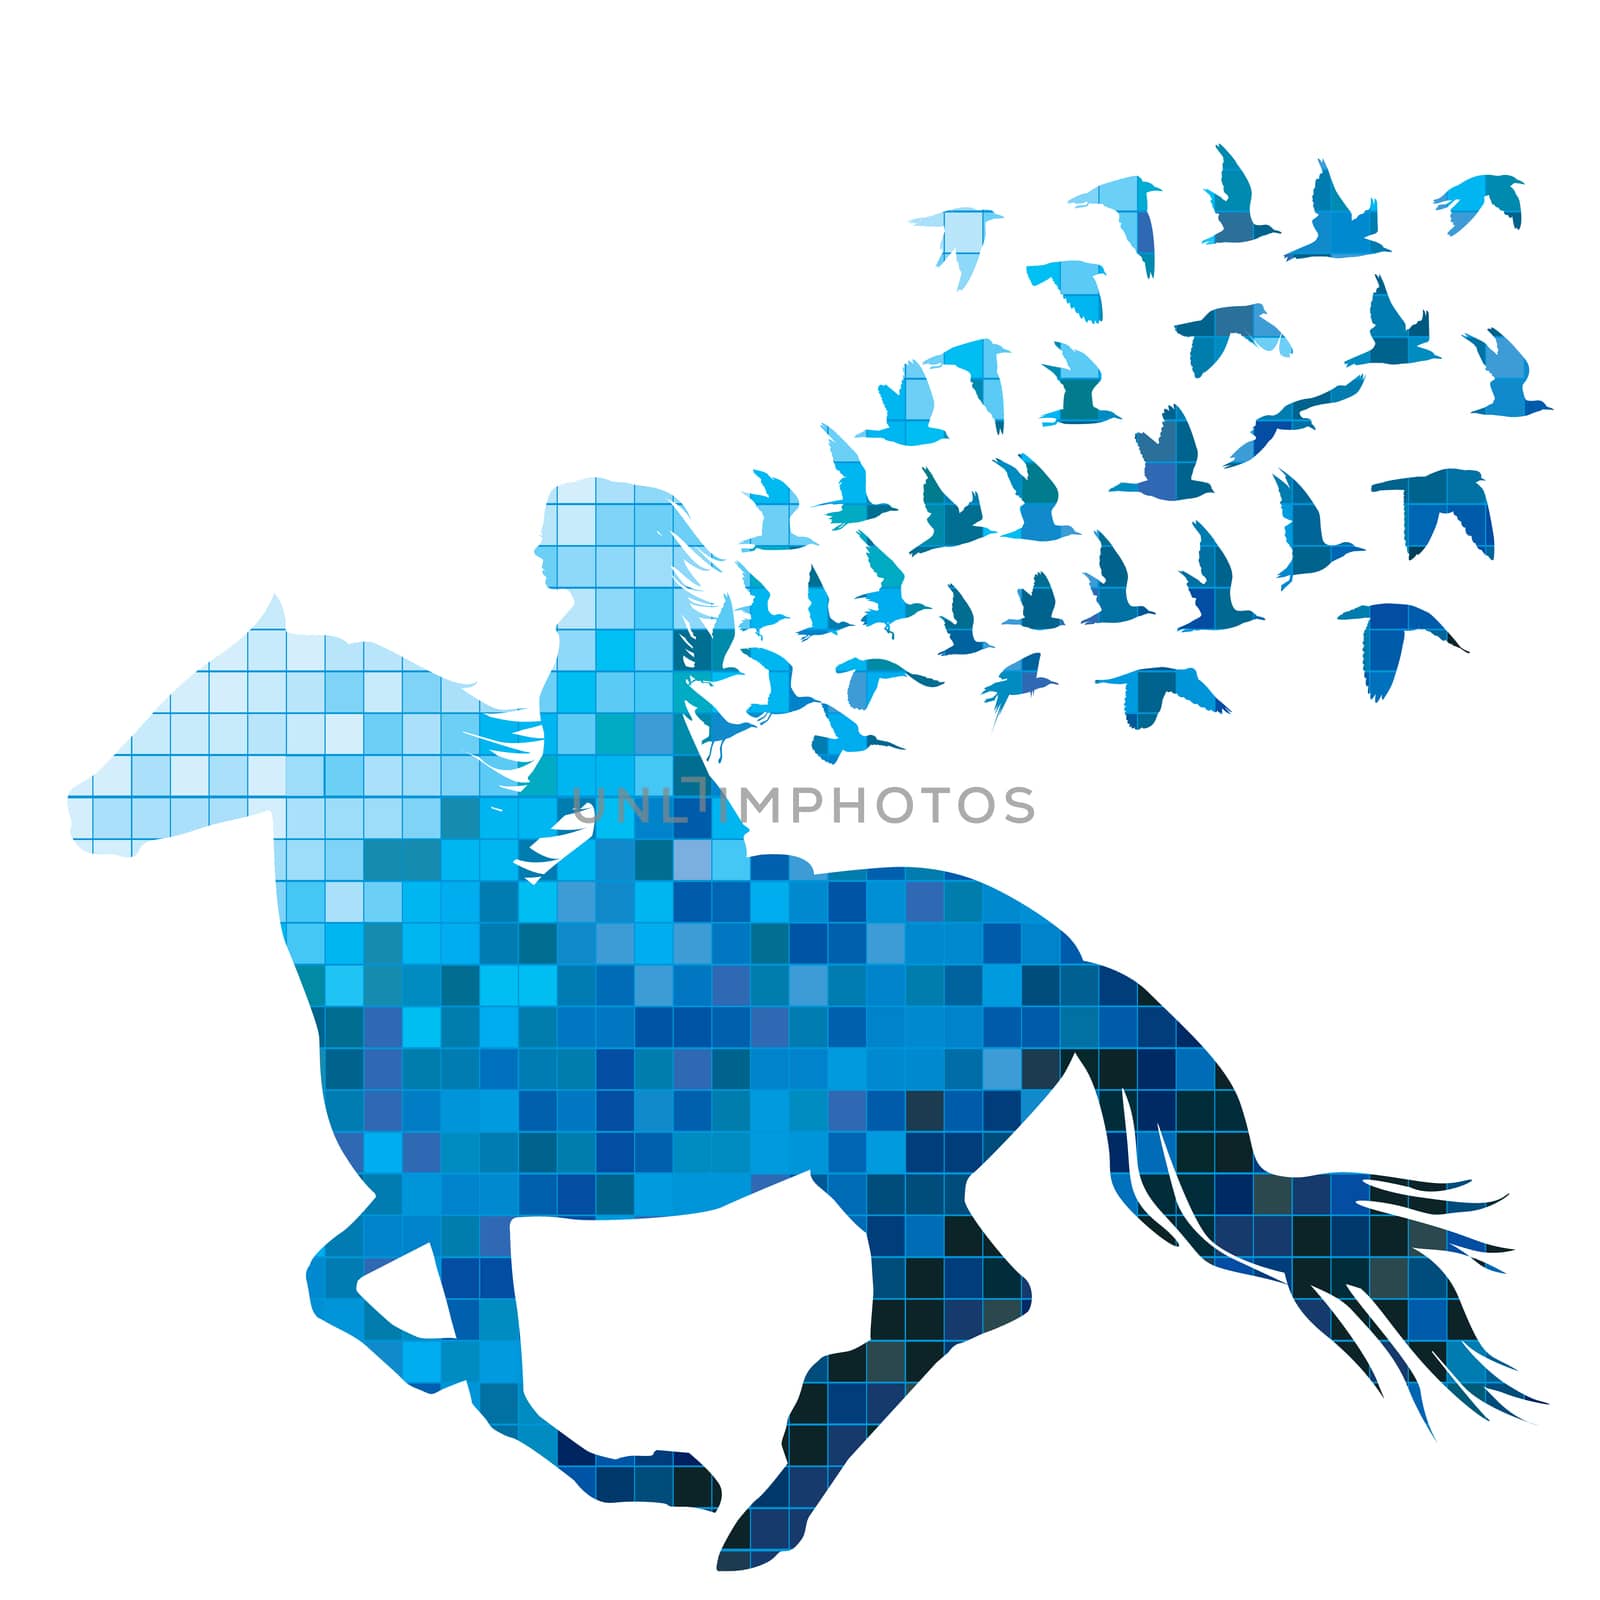 Mosaic tile style of woman rider with birds by hibrida13